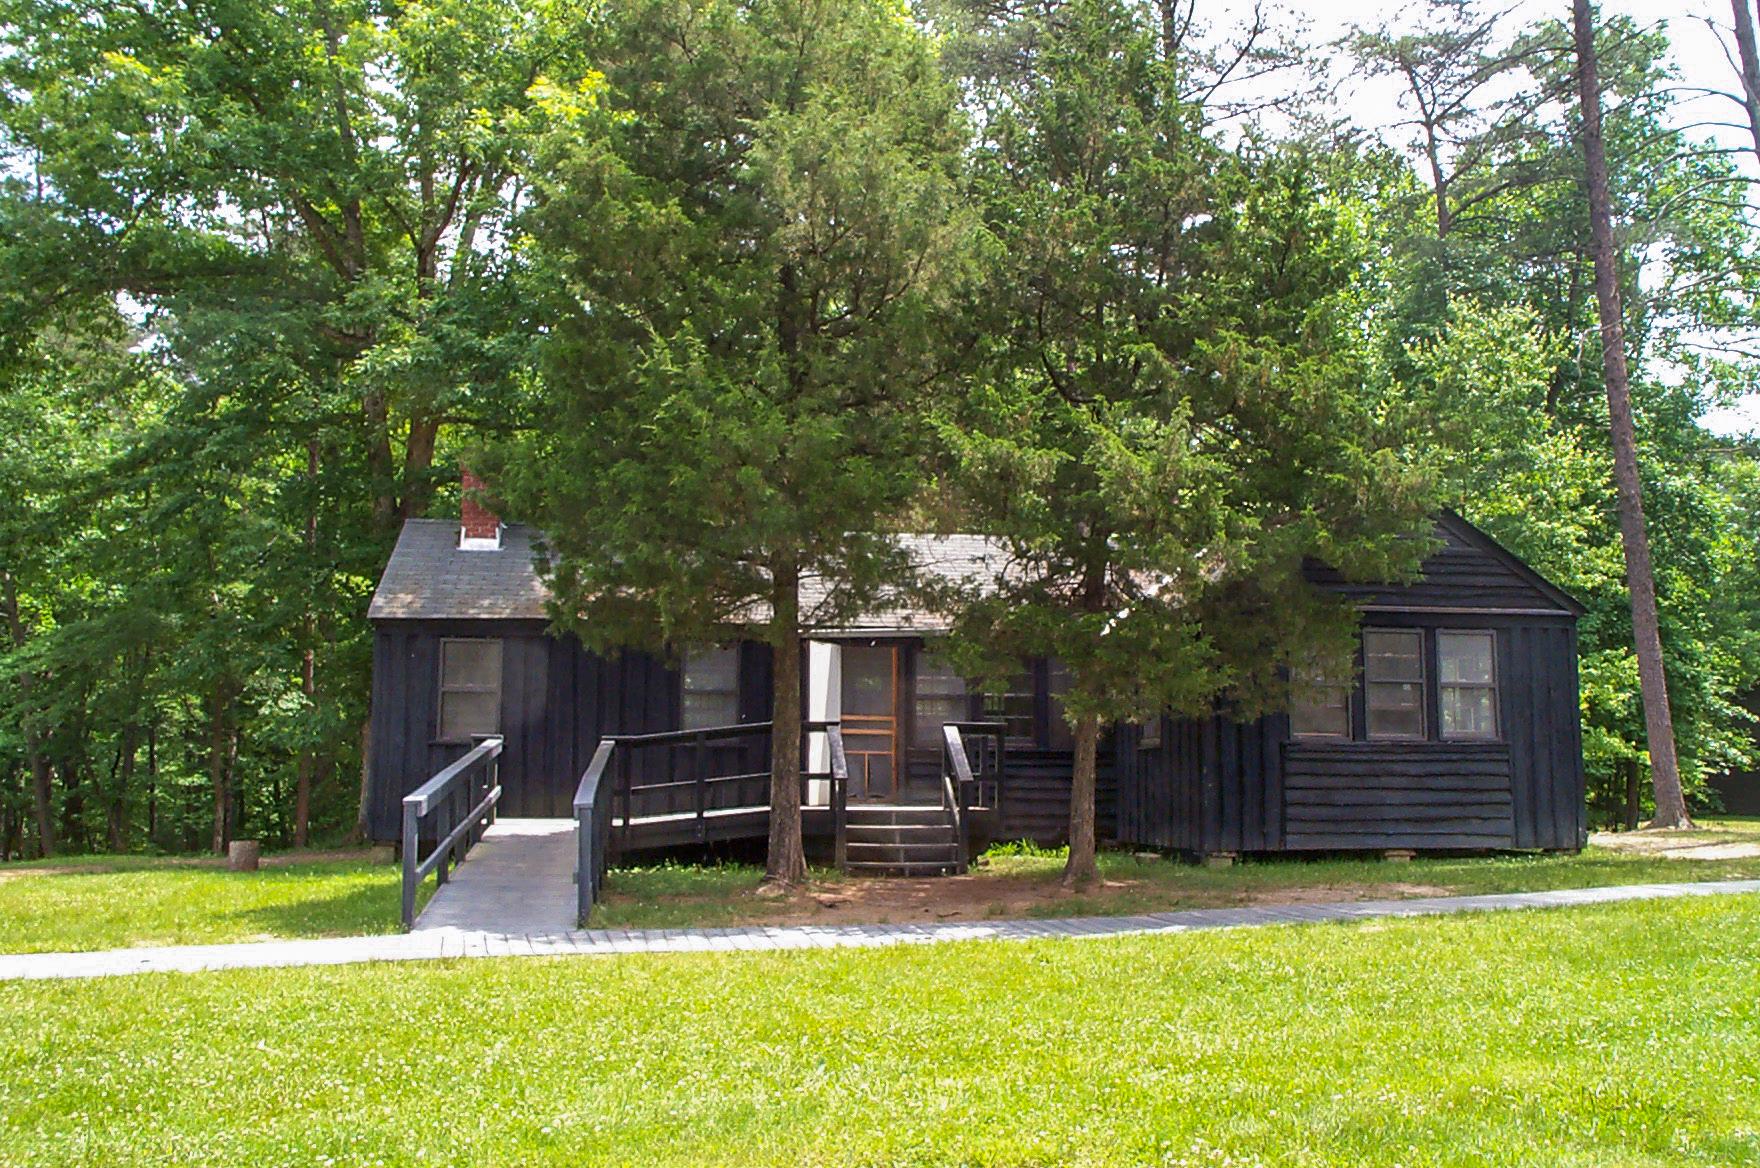 A dark brown wooden building with a ramp stands among trees with a grassy lawn